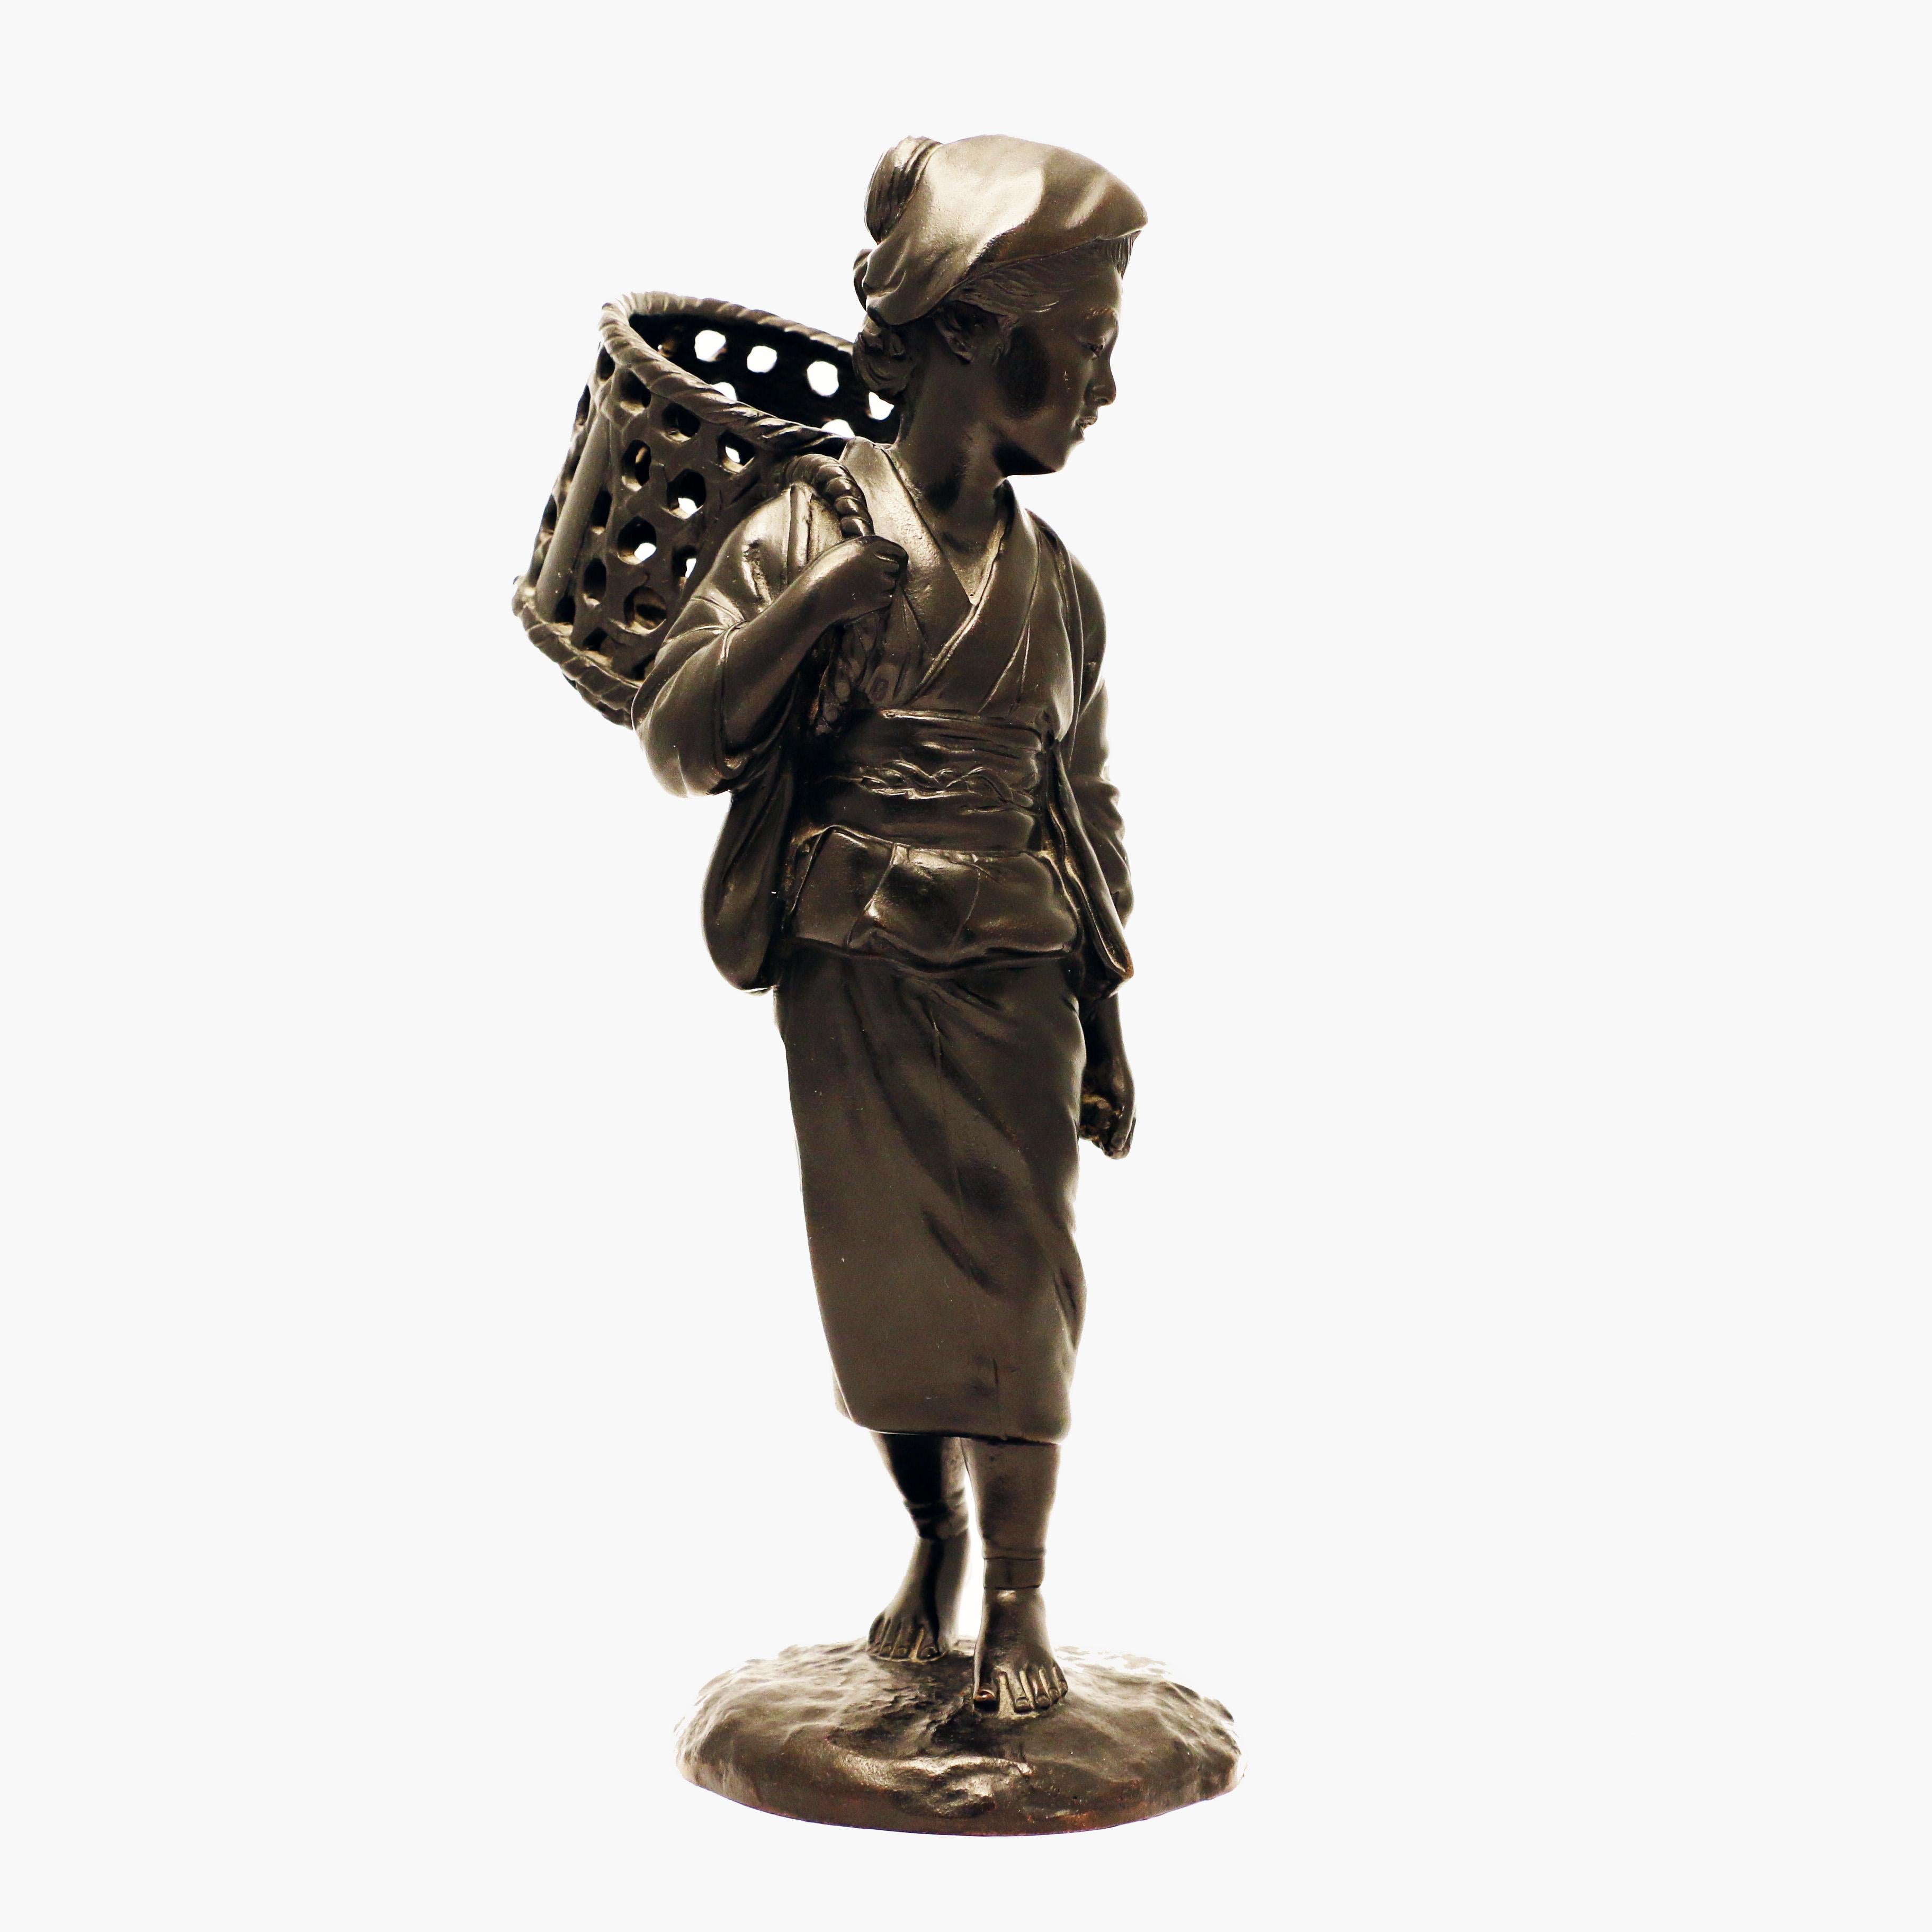 Cast Japanese Bronze Figure, a Peasant Girl with a Wicker Basket